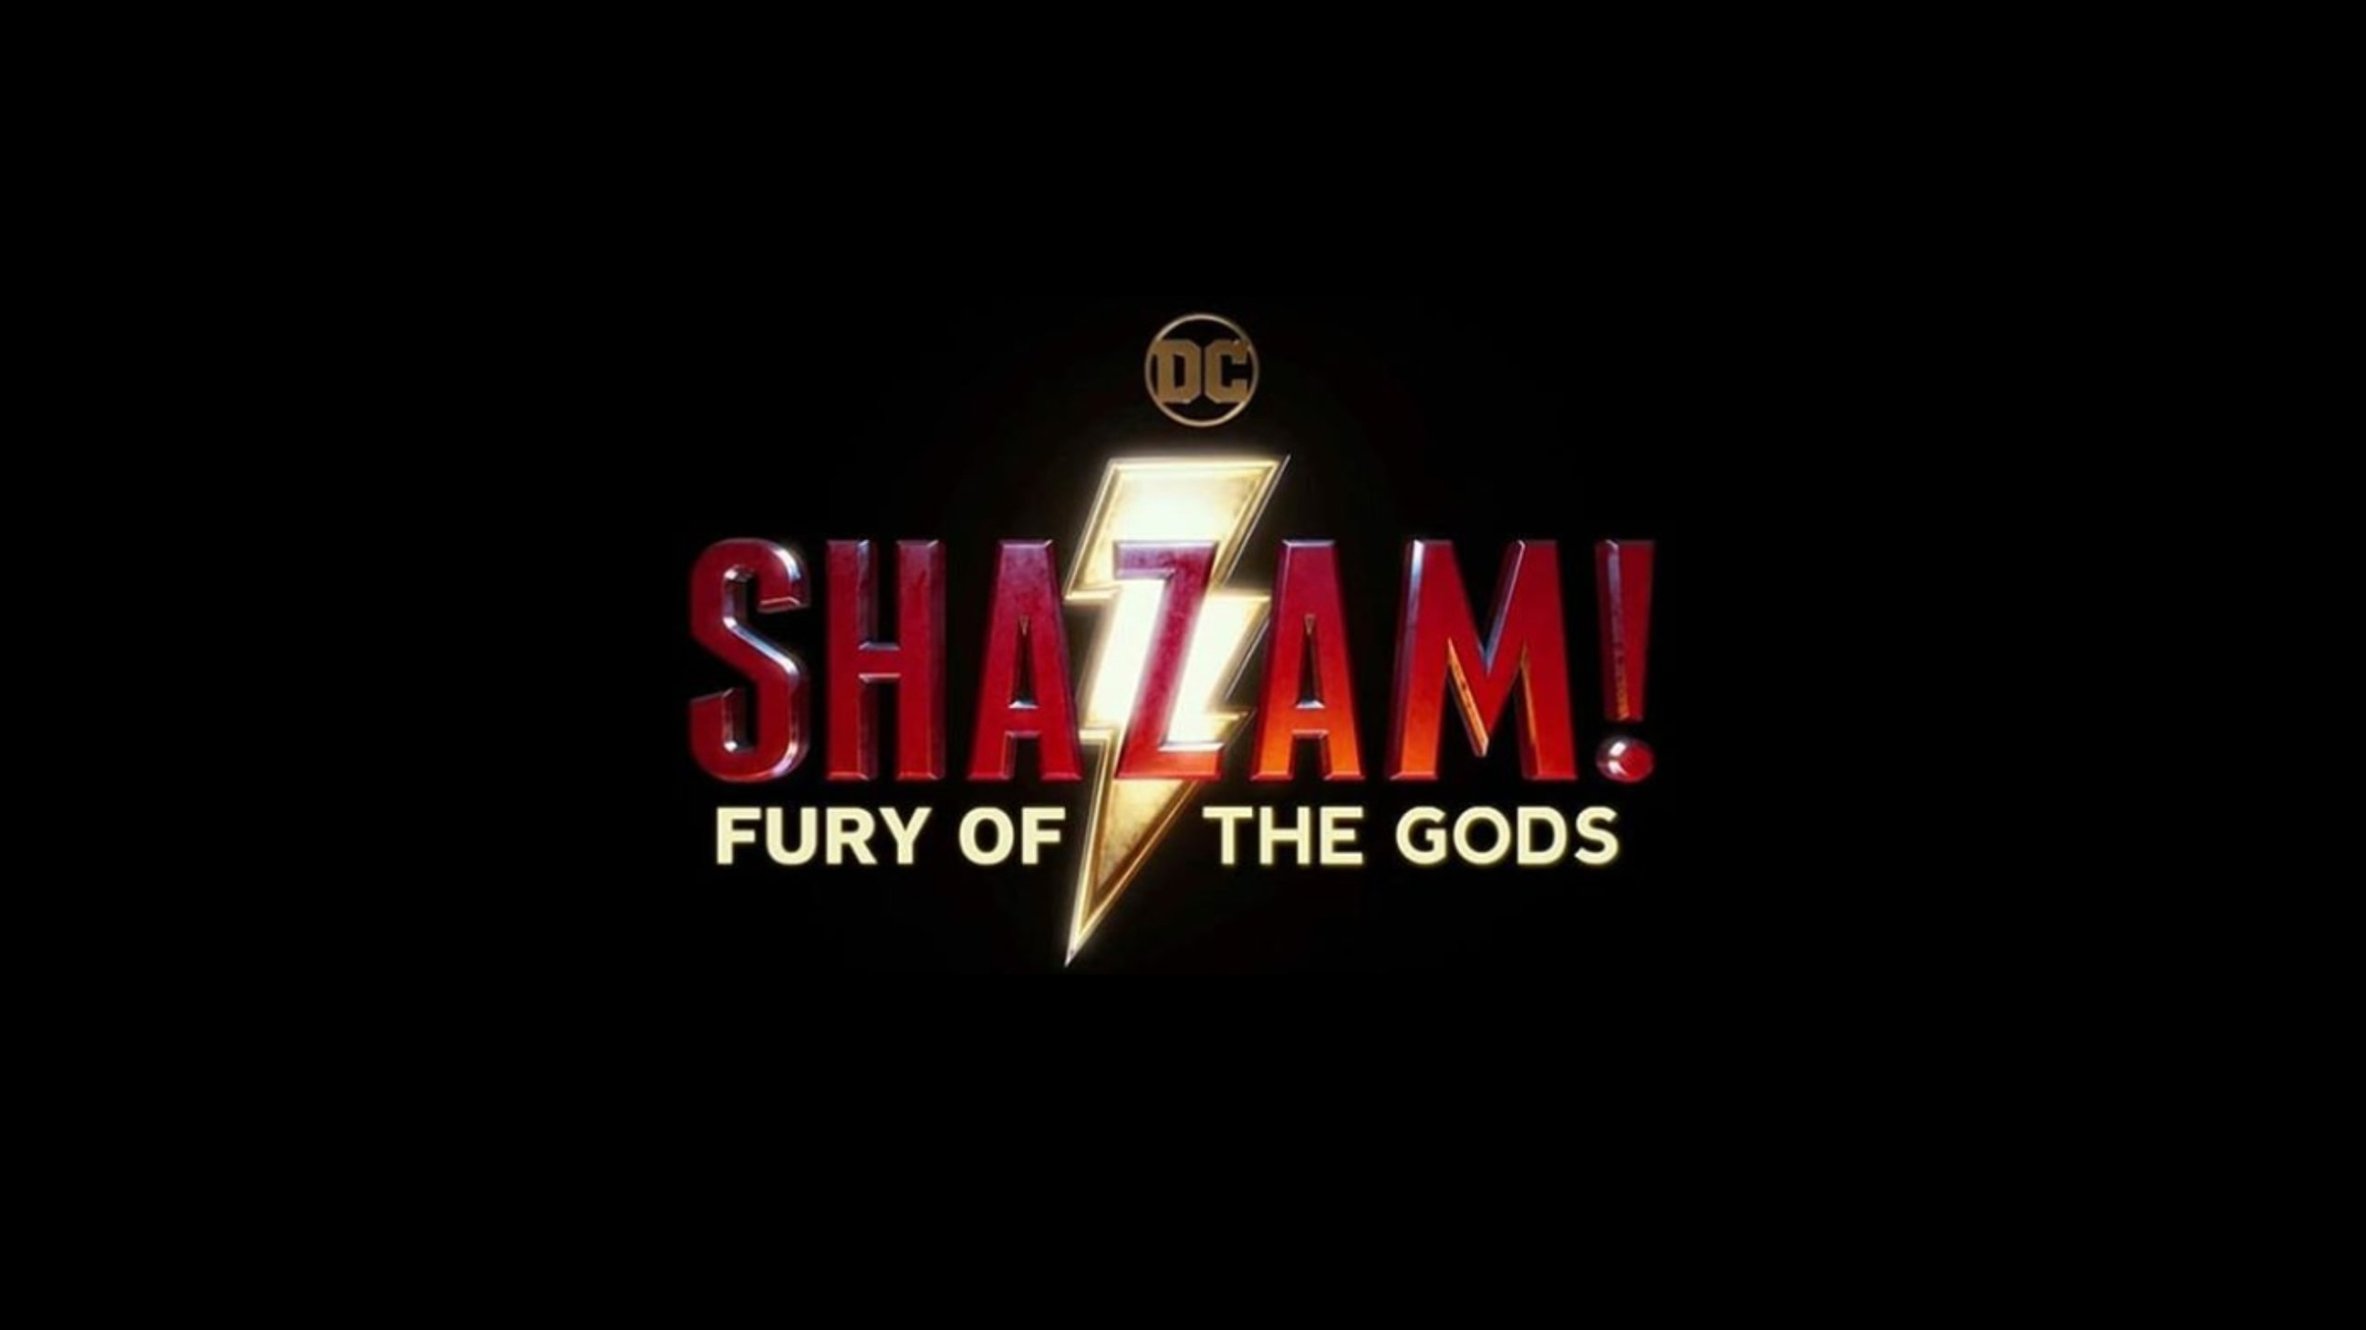 DC's SHAZAM 2 - Casting Males & Females, ages 18-40 to portray news reporters, camera men and news producers